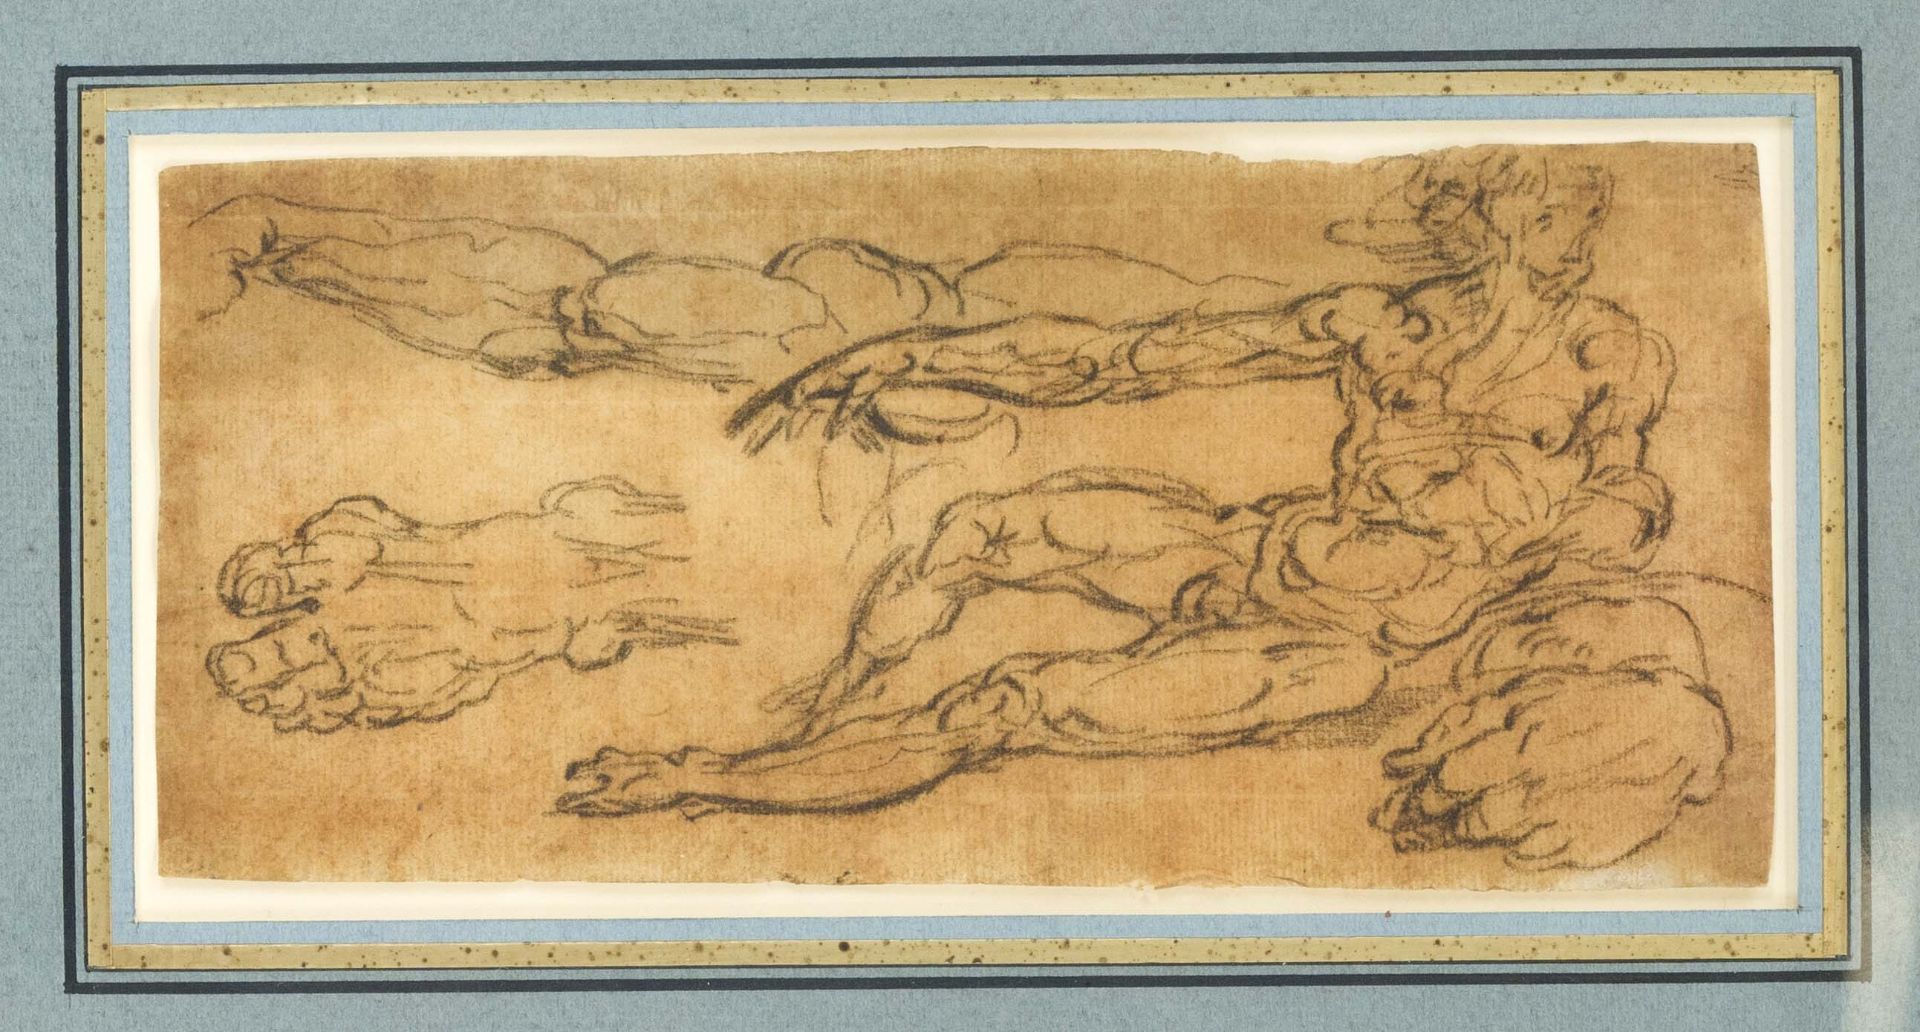 Unknown artist of the 17th/18th century, Study of a male nude and his extremities, black chalk on